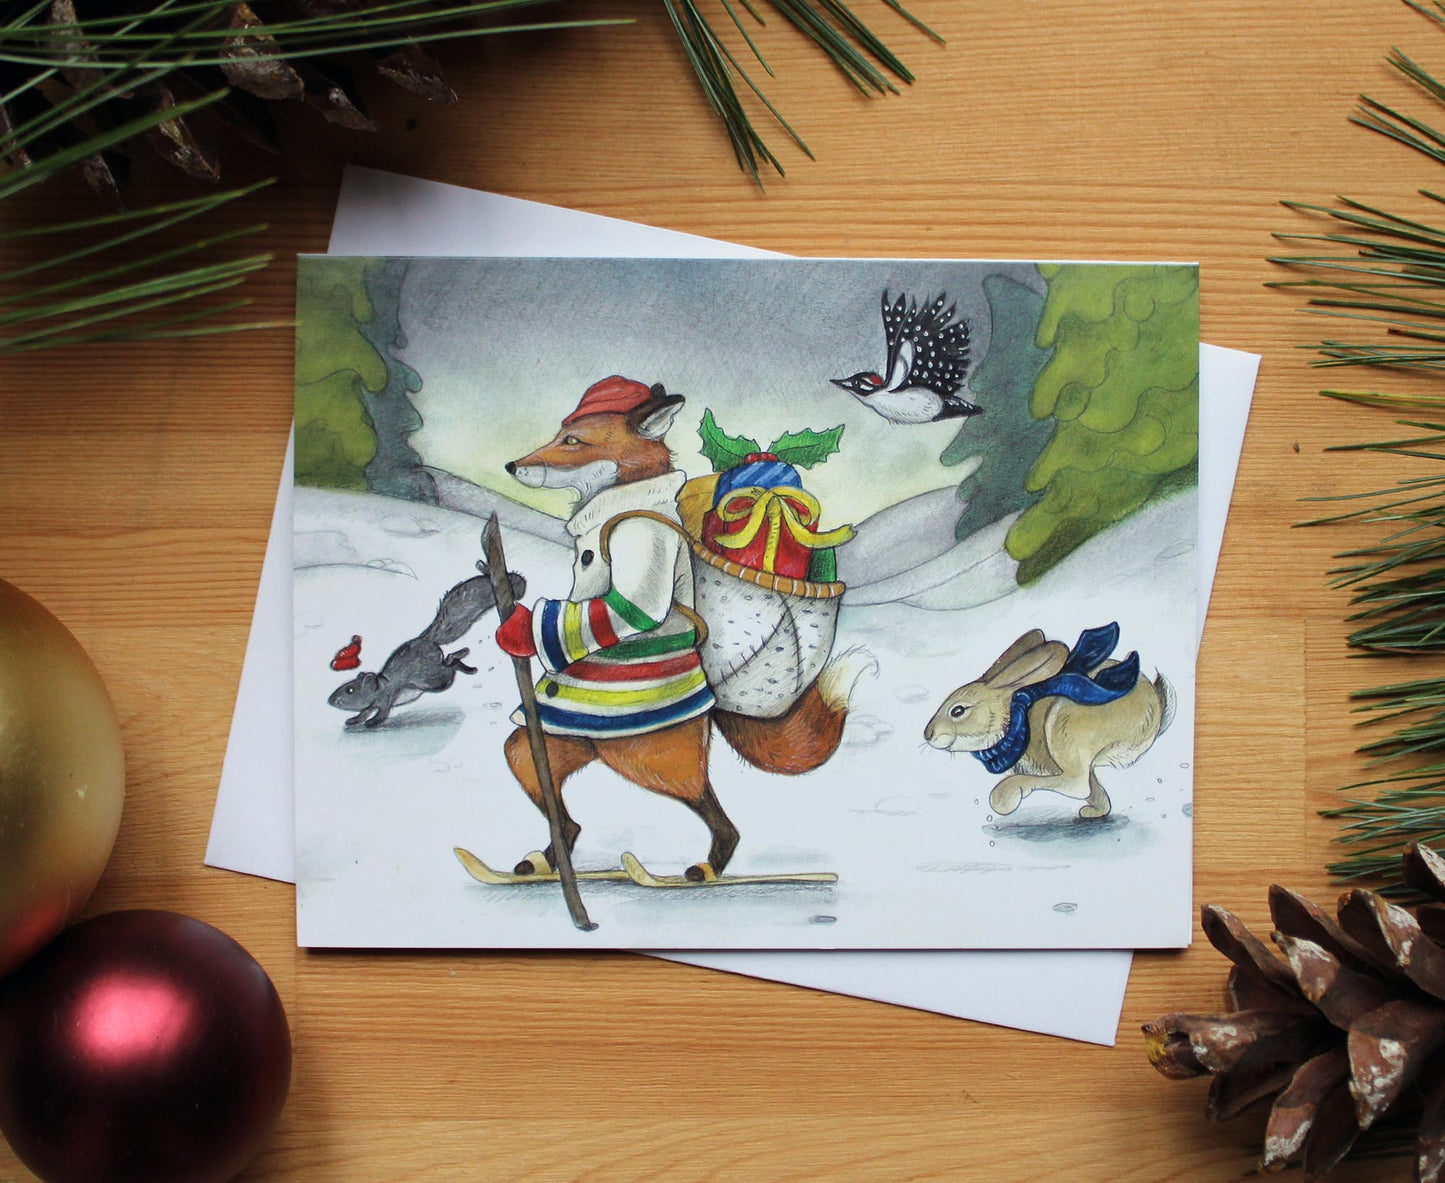 illustrated christmas card of fox wearing a Hudson Bay Coat and travelling with gifts carried in a birch bark basket on his back. Rabbit, squirrel and woodpecker join him on his journey.